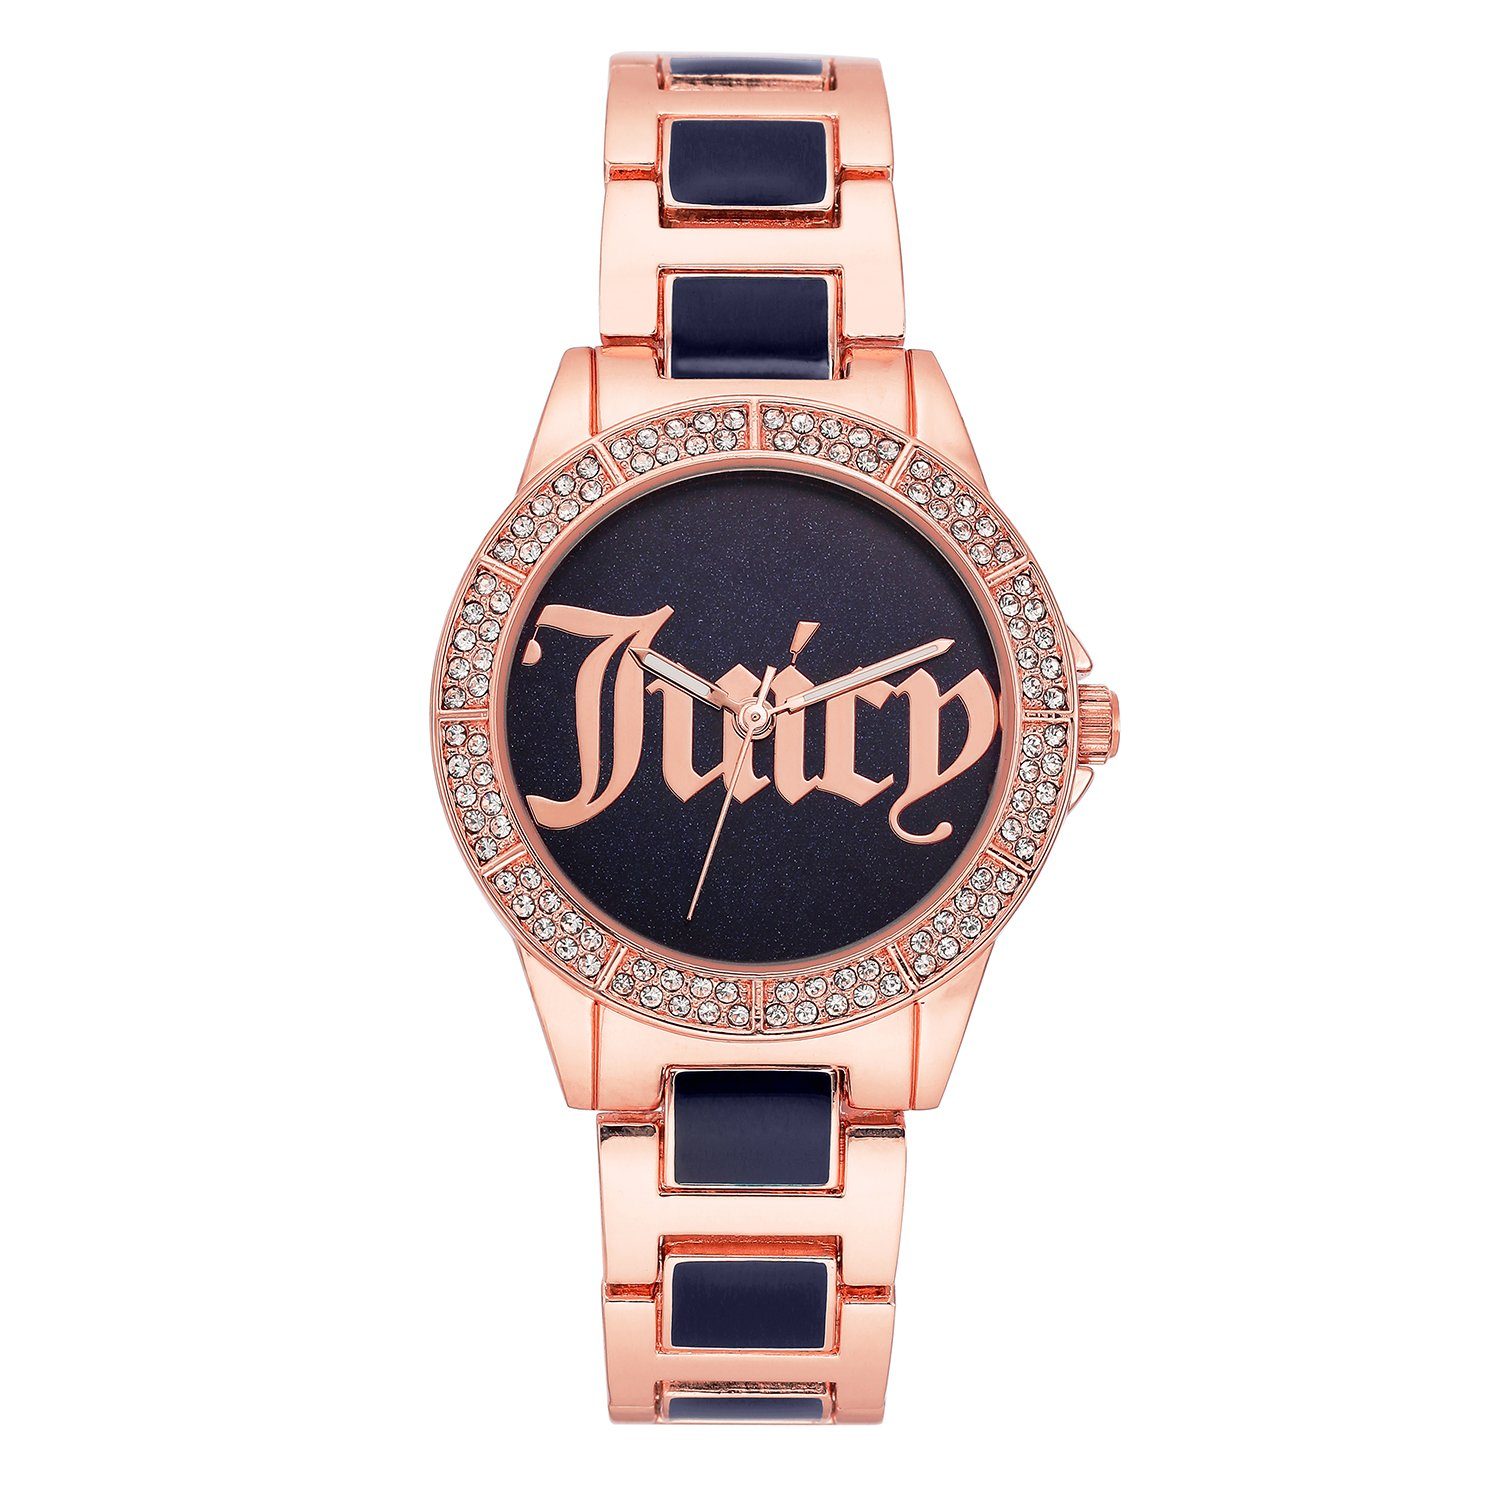 Couture JC/1308NVRG Juicy Digitaluhr